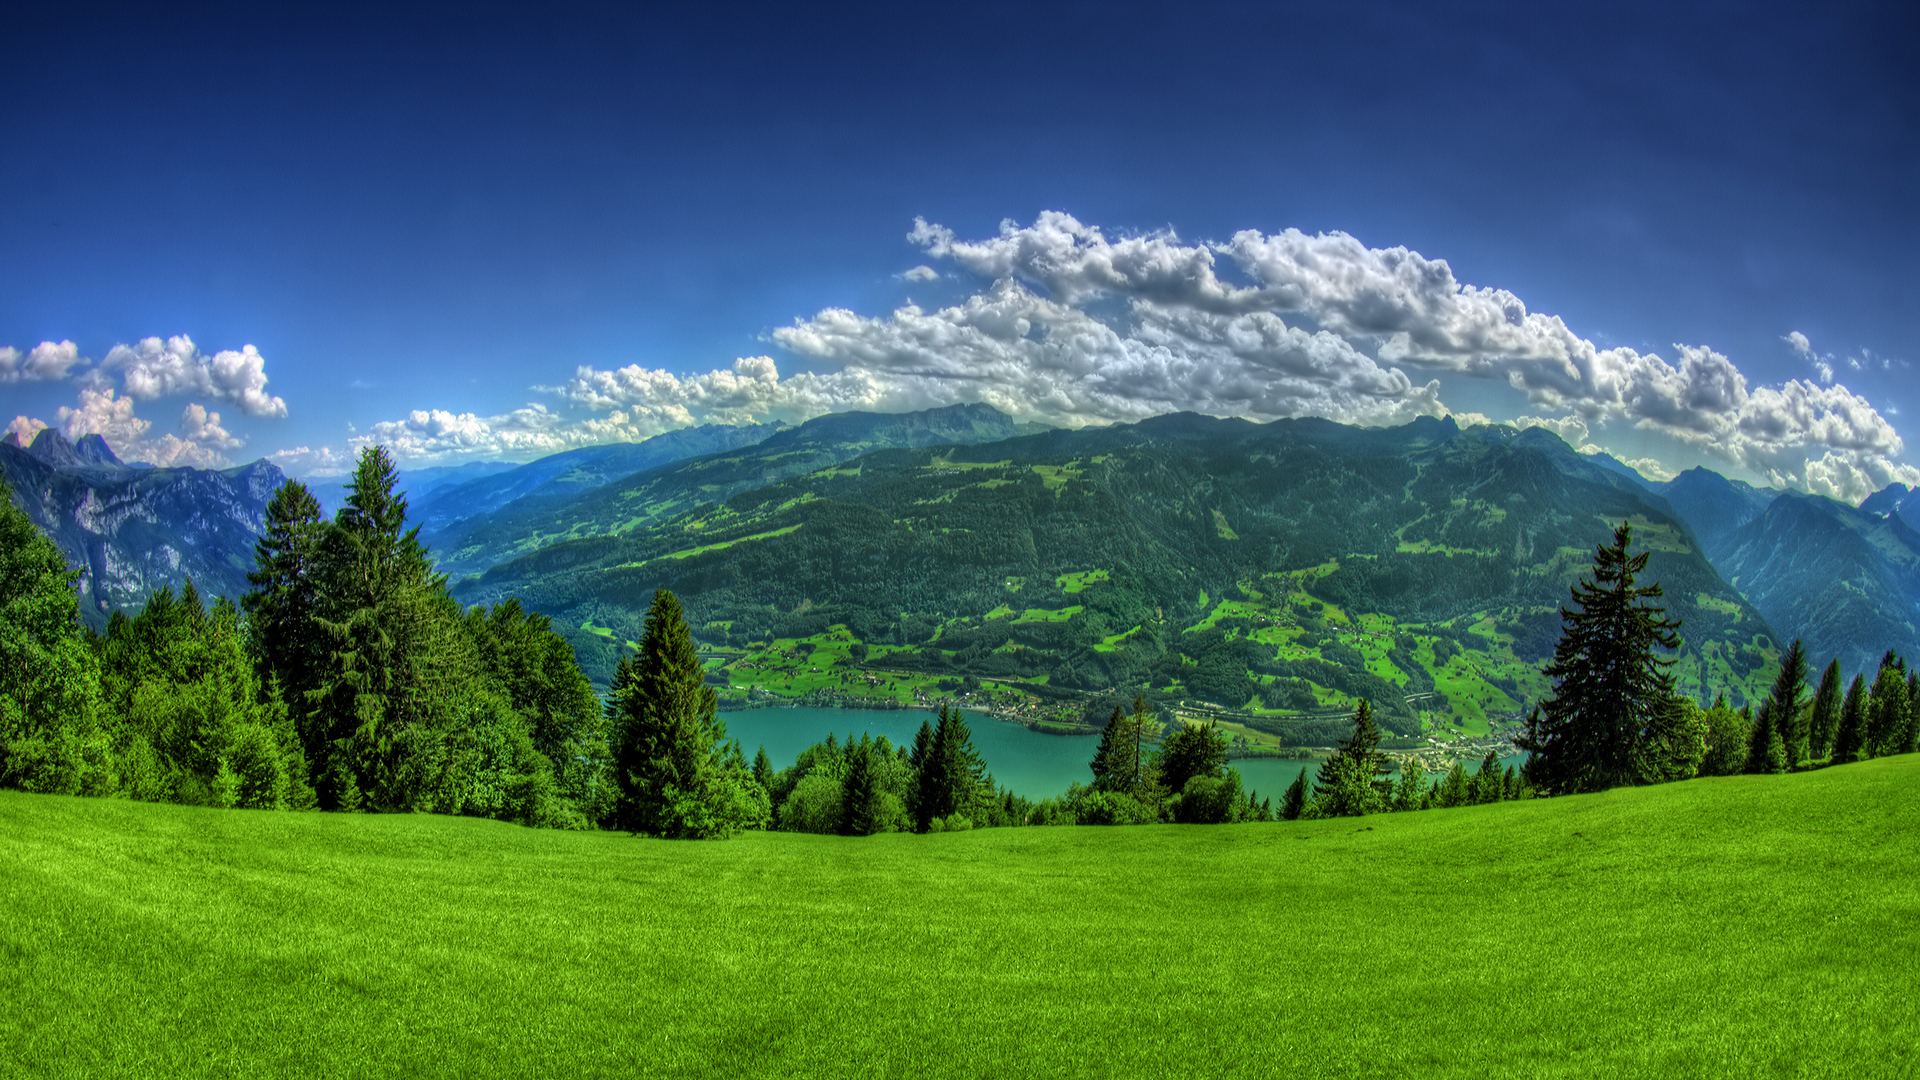 mountains, Clouds, Landscapes, Trees, Grass, Towns, Lake, Lucerne Wallpaper